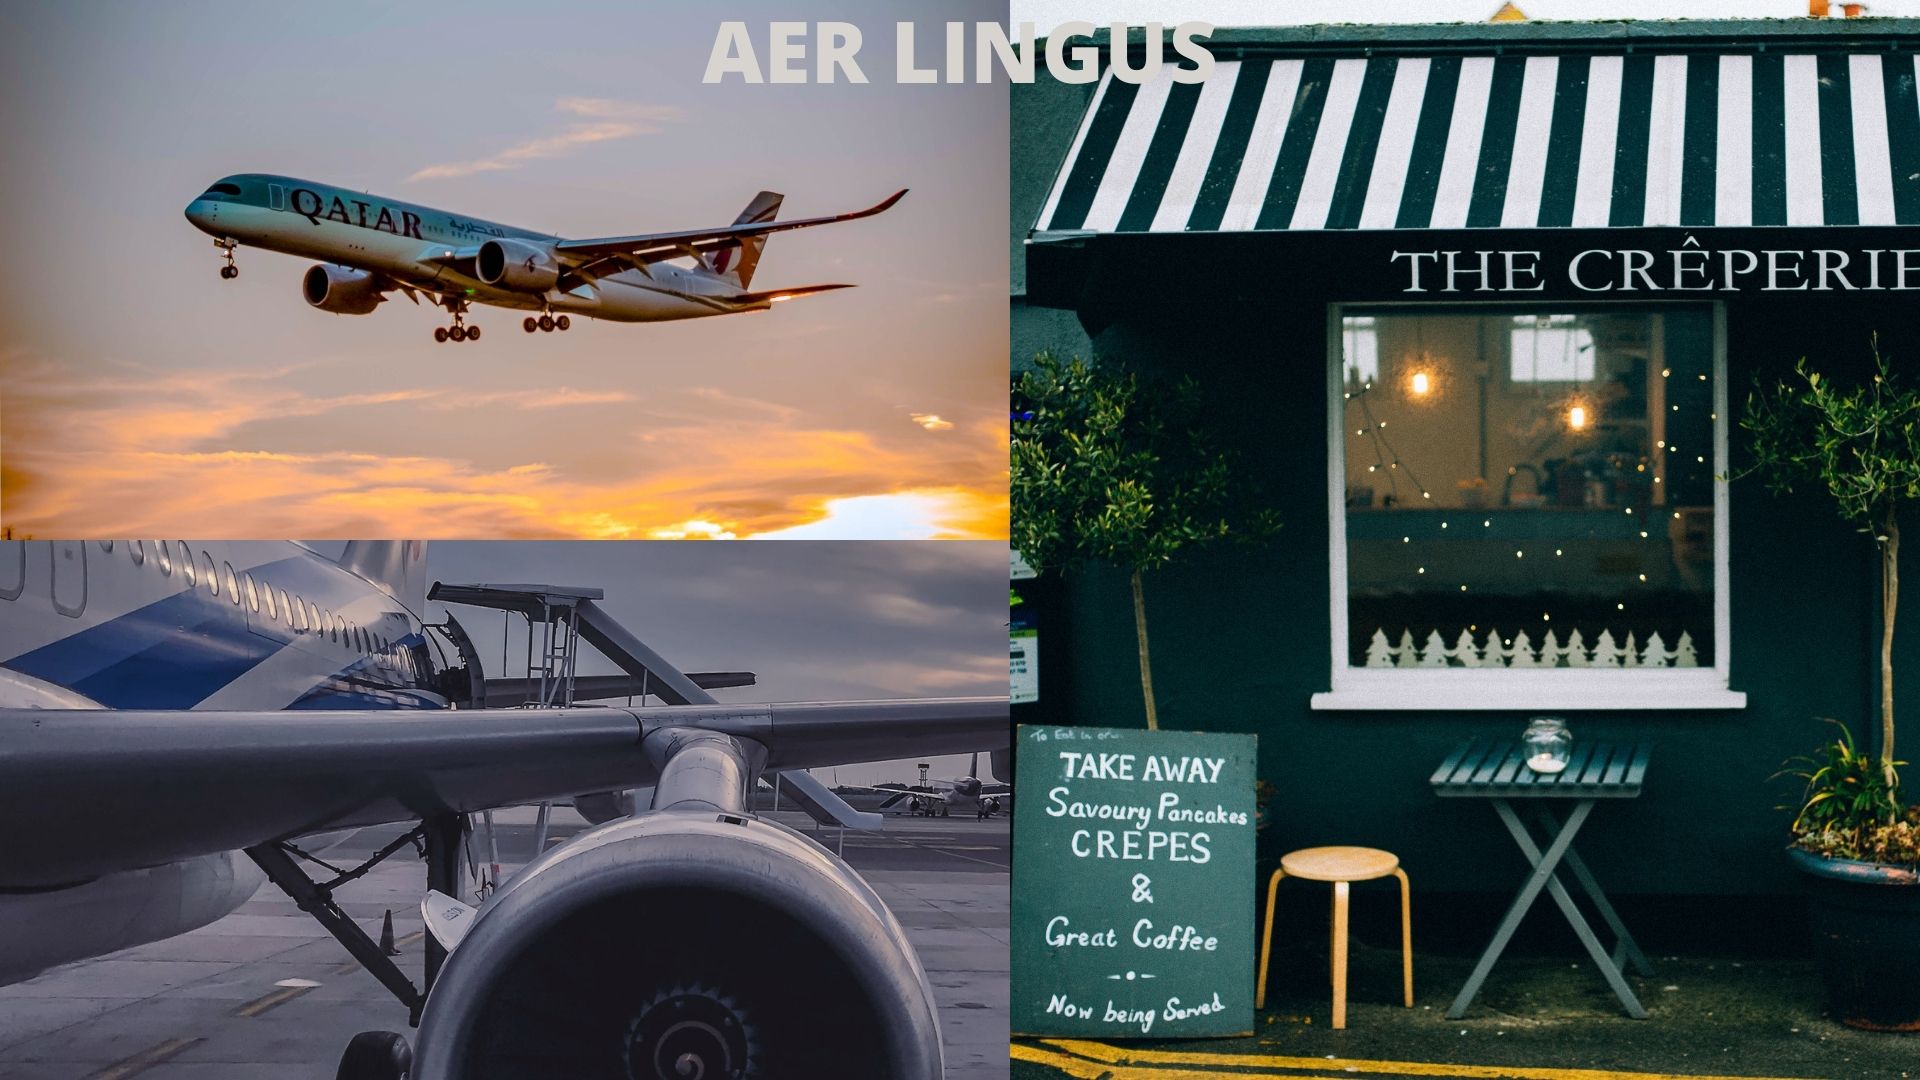 You are currently viewing AER LINGUS